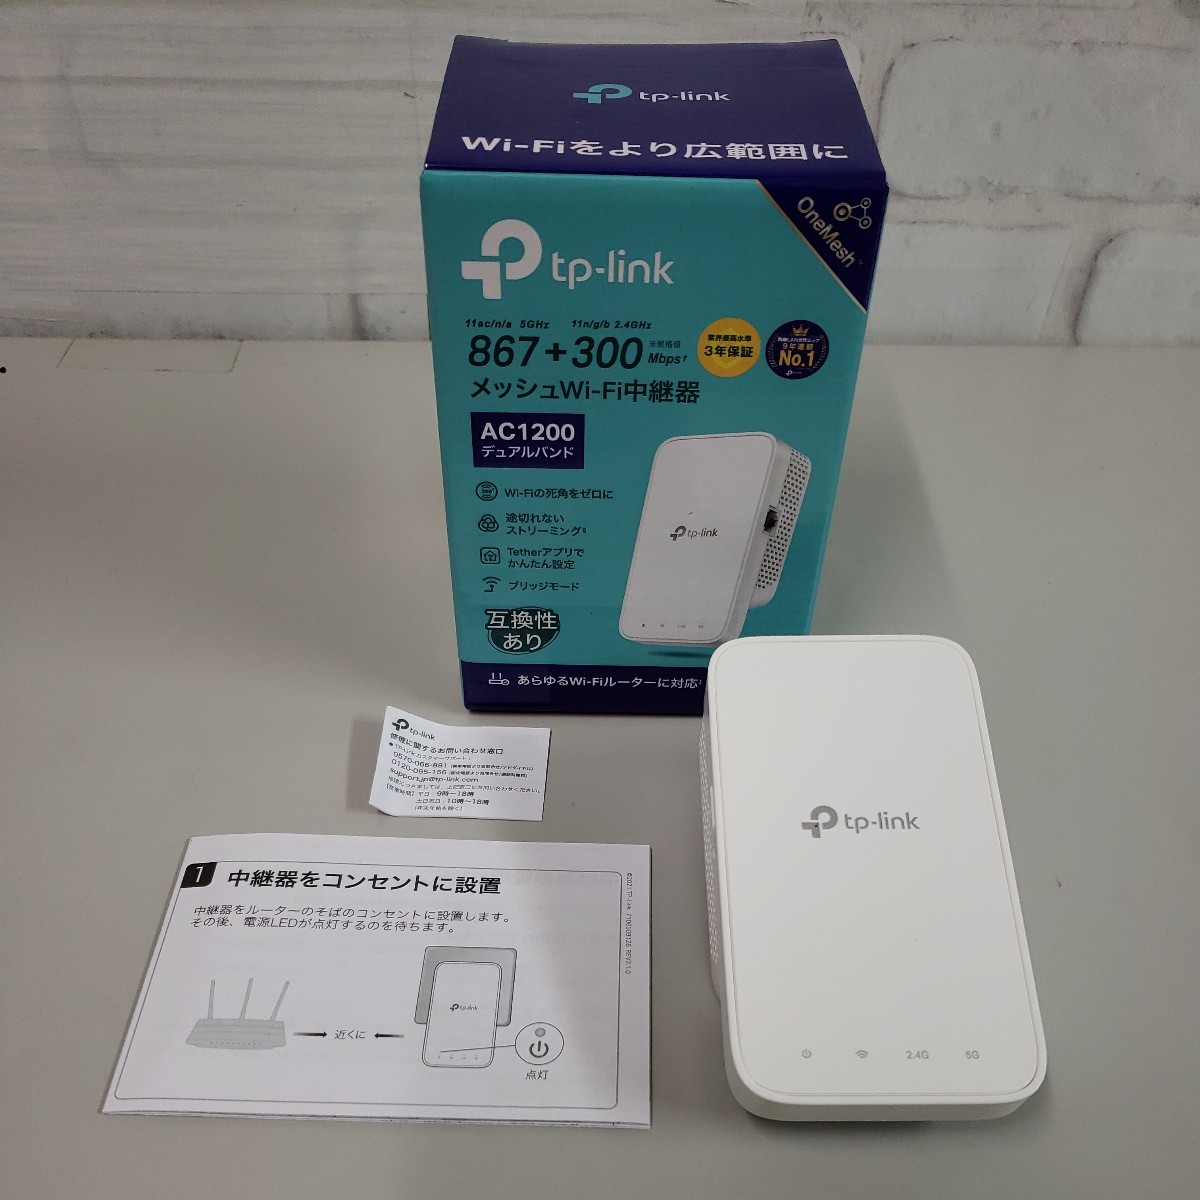 602y0710★TP-Link WiFi 無線LAN 中継機 Wi-Fi 5 11ac AC1200 866+300Mbps Wi-Fi中継機 コンパクト コンセント　RE330_画像1